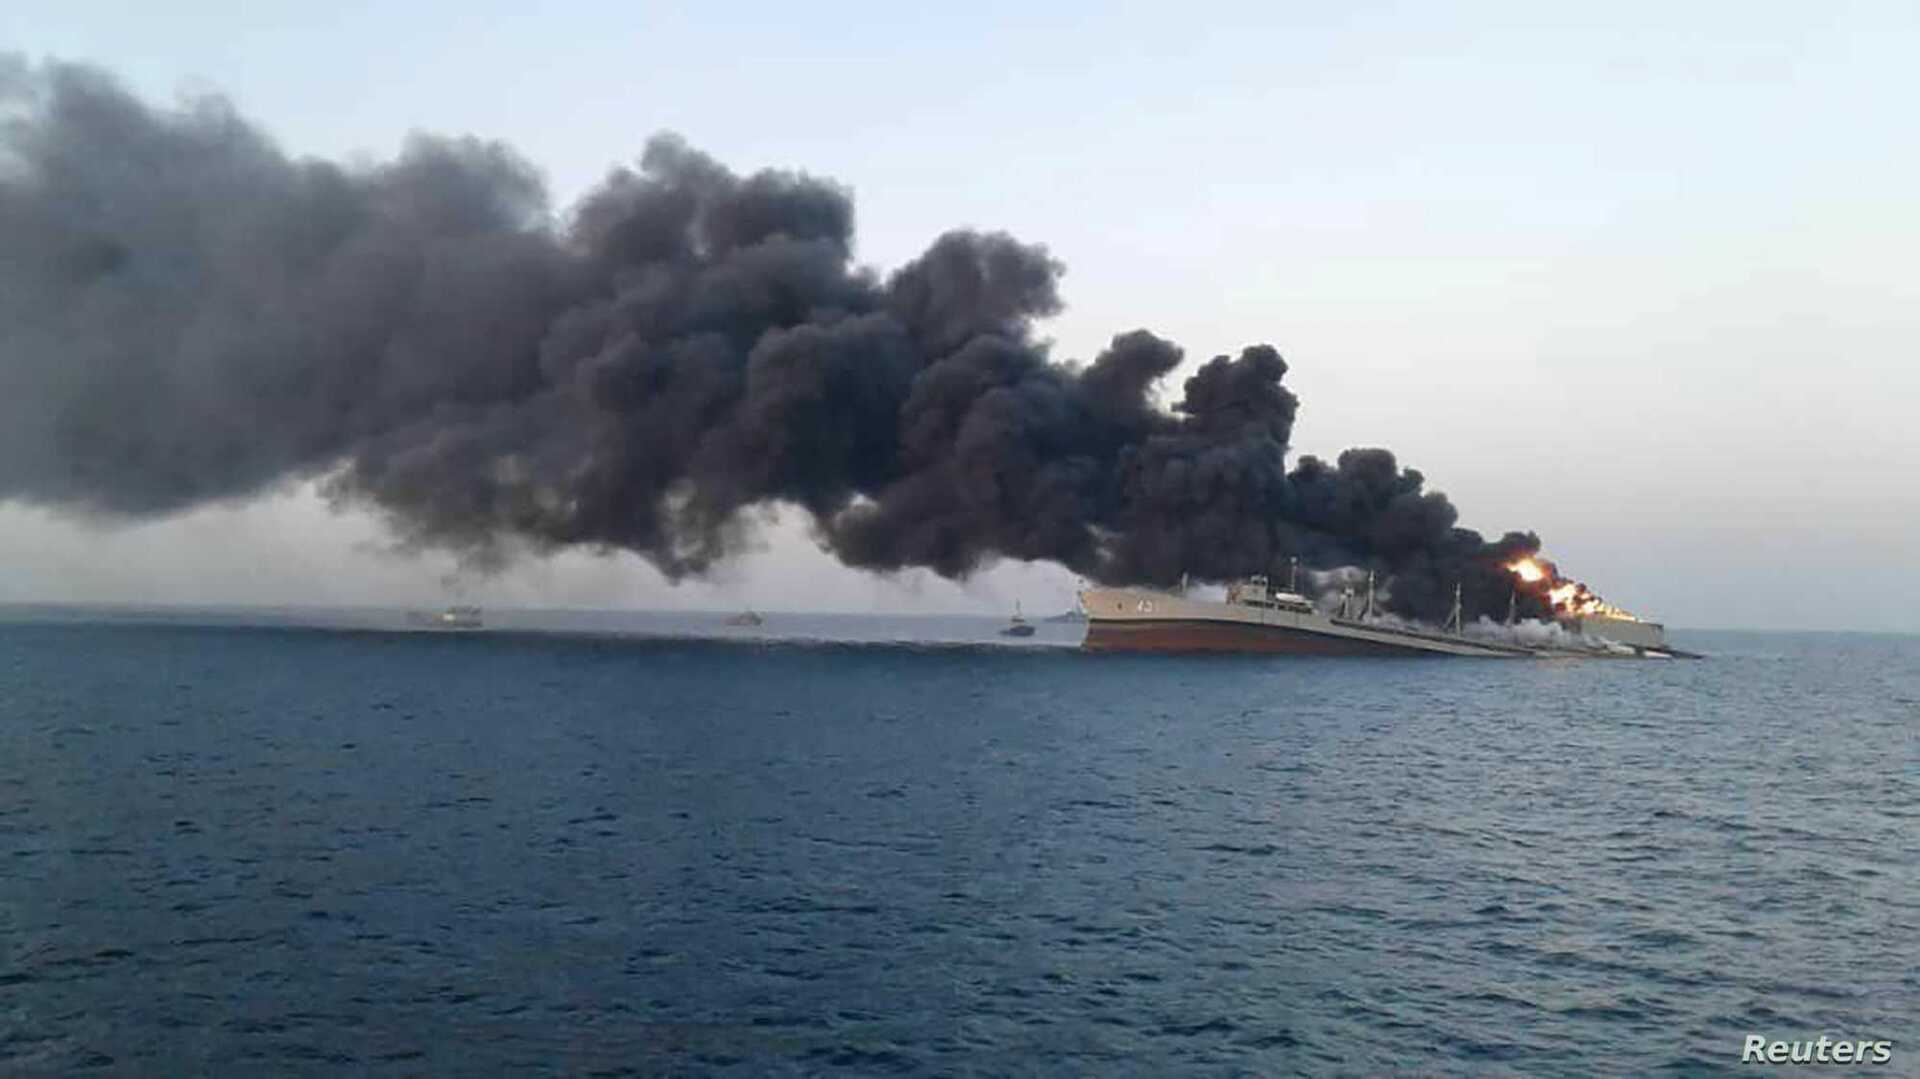 Houthis Claim Attack on British Oil Tanker in Gulf of Aden